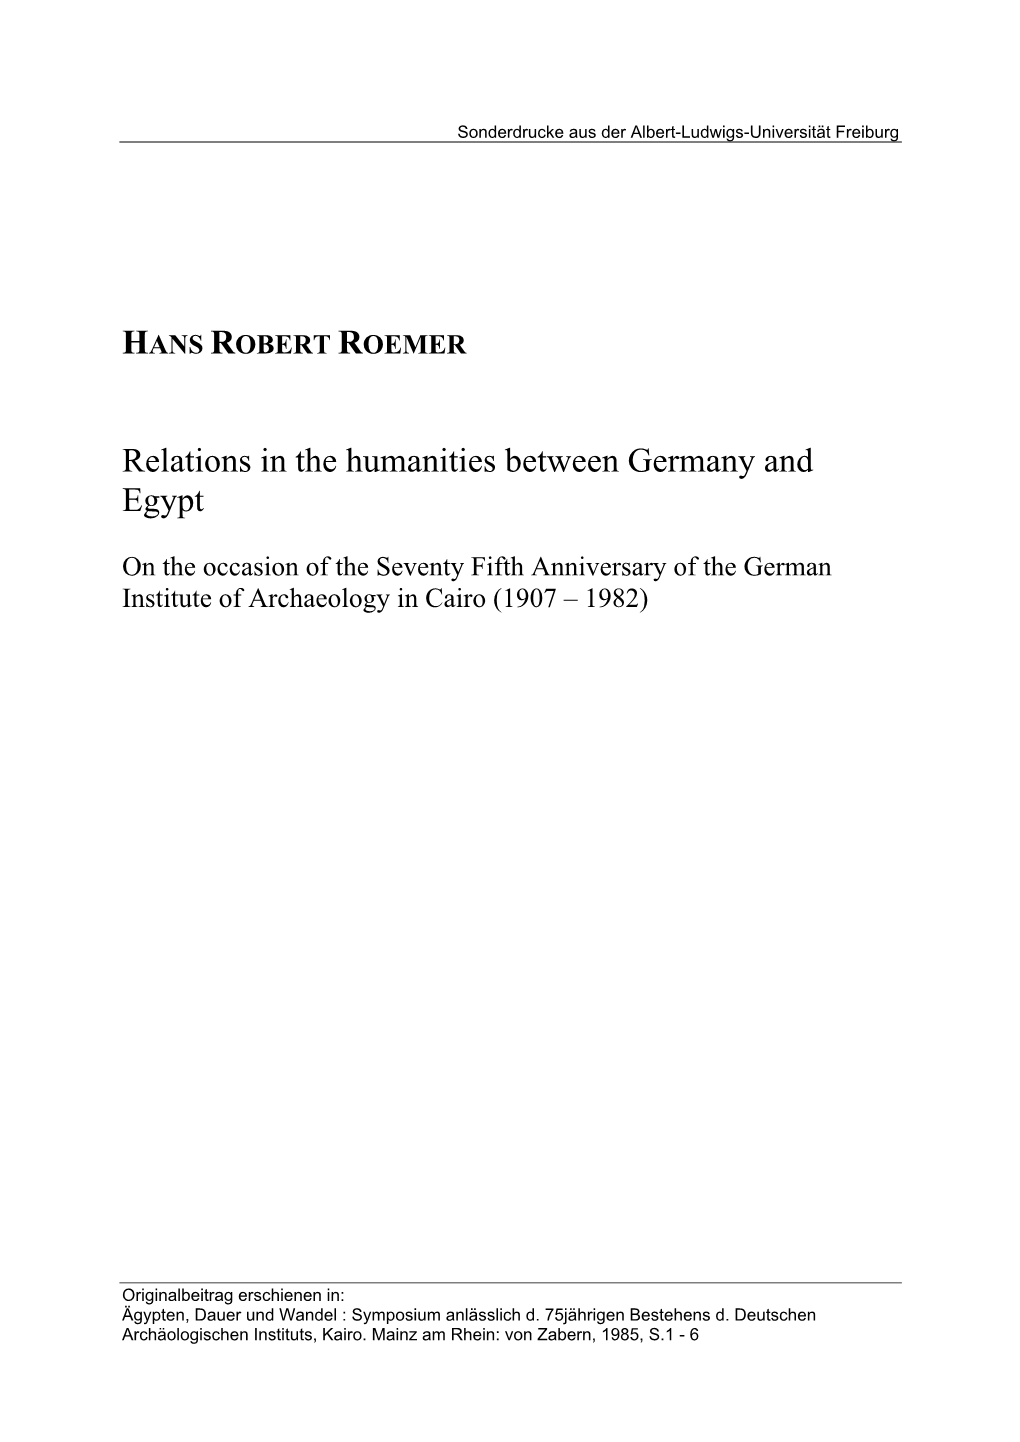 Relations in the Humanities Between Germany and Egypt